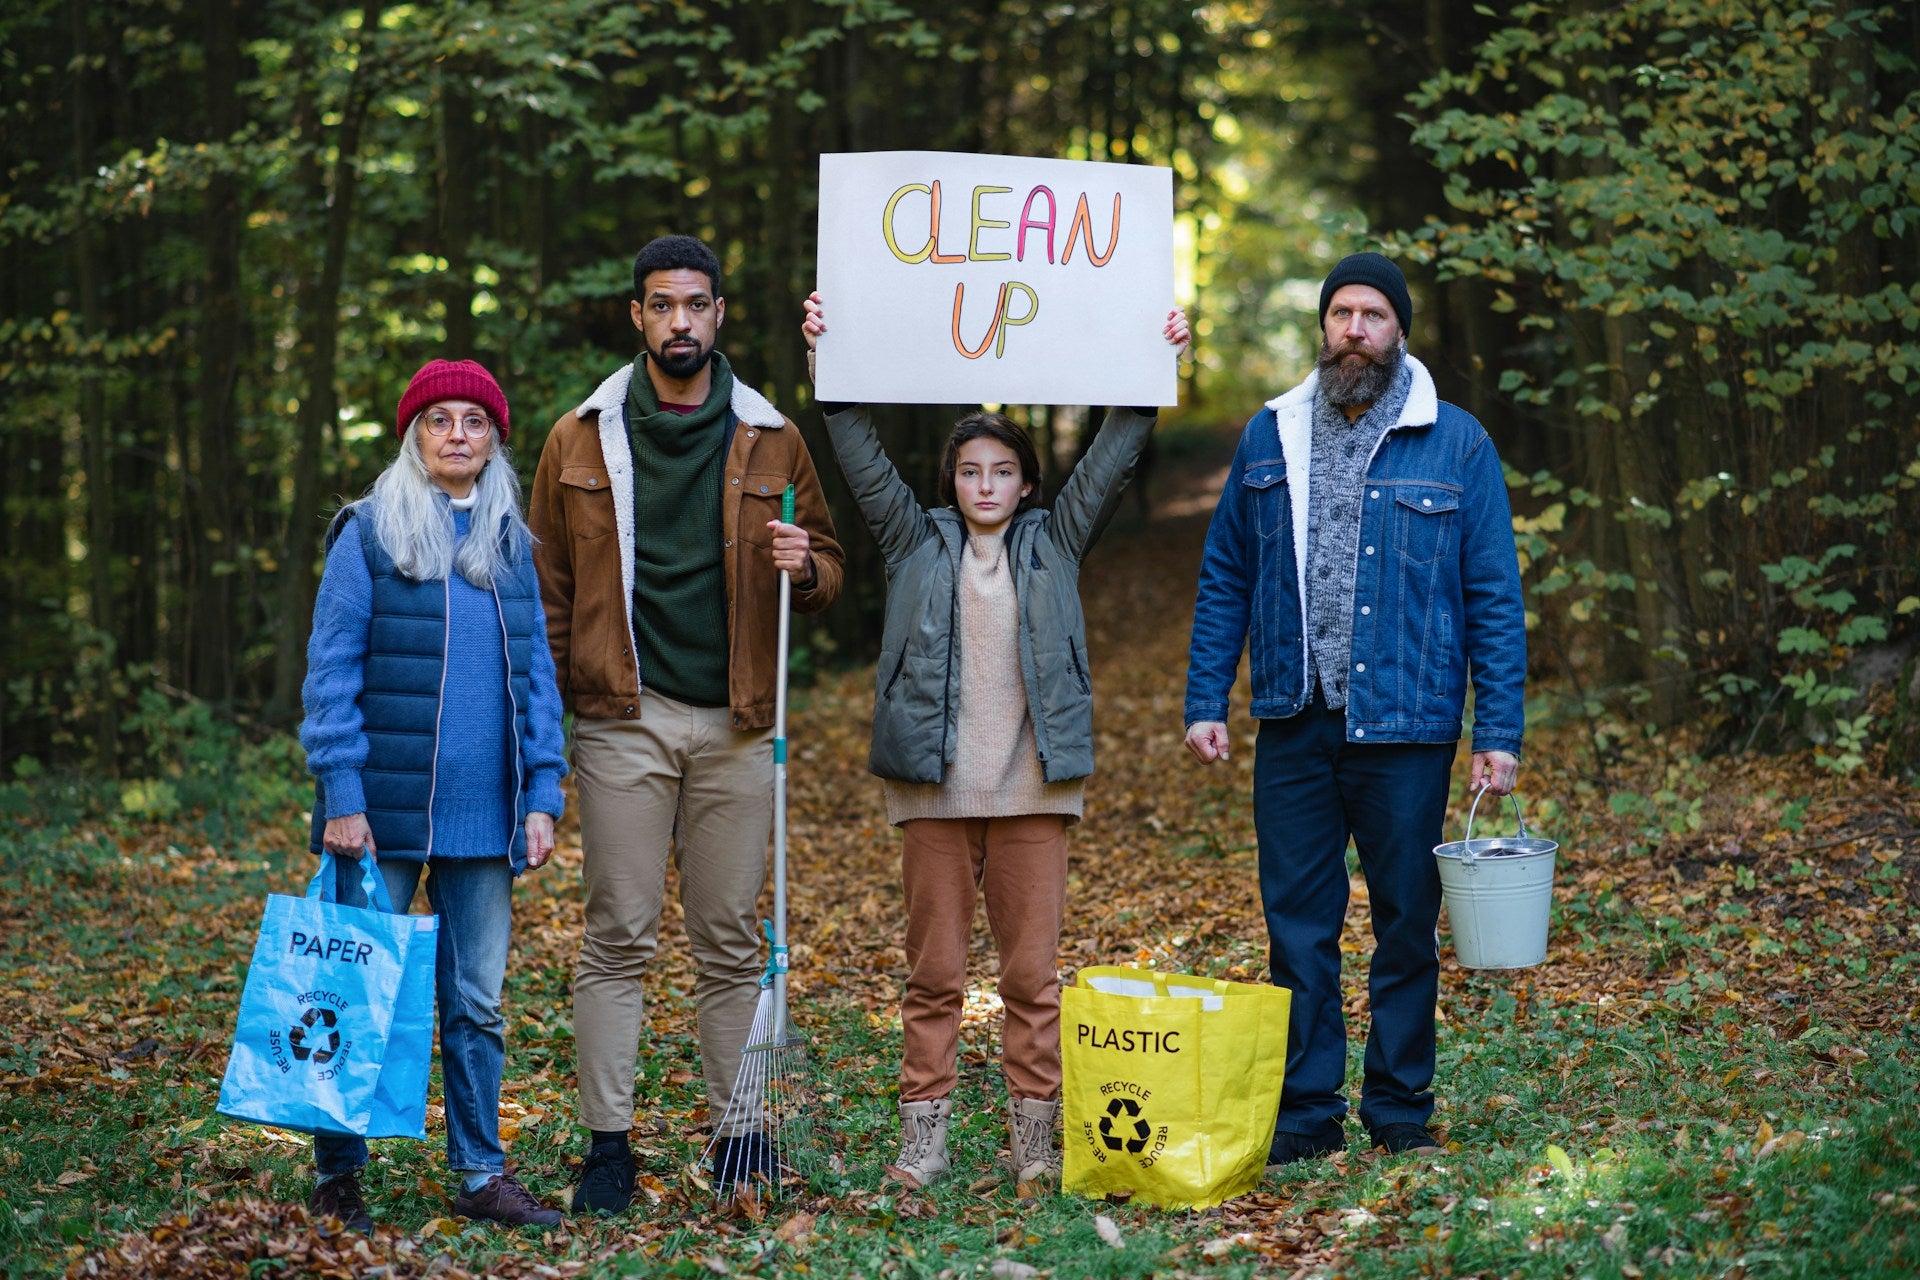 A diverse group of people working together to do a trash cleanup in a forest